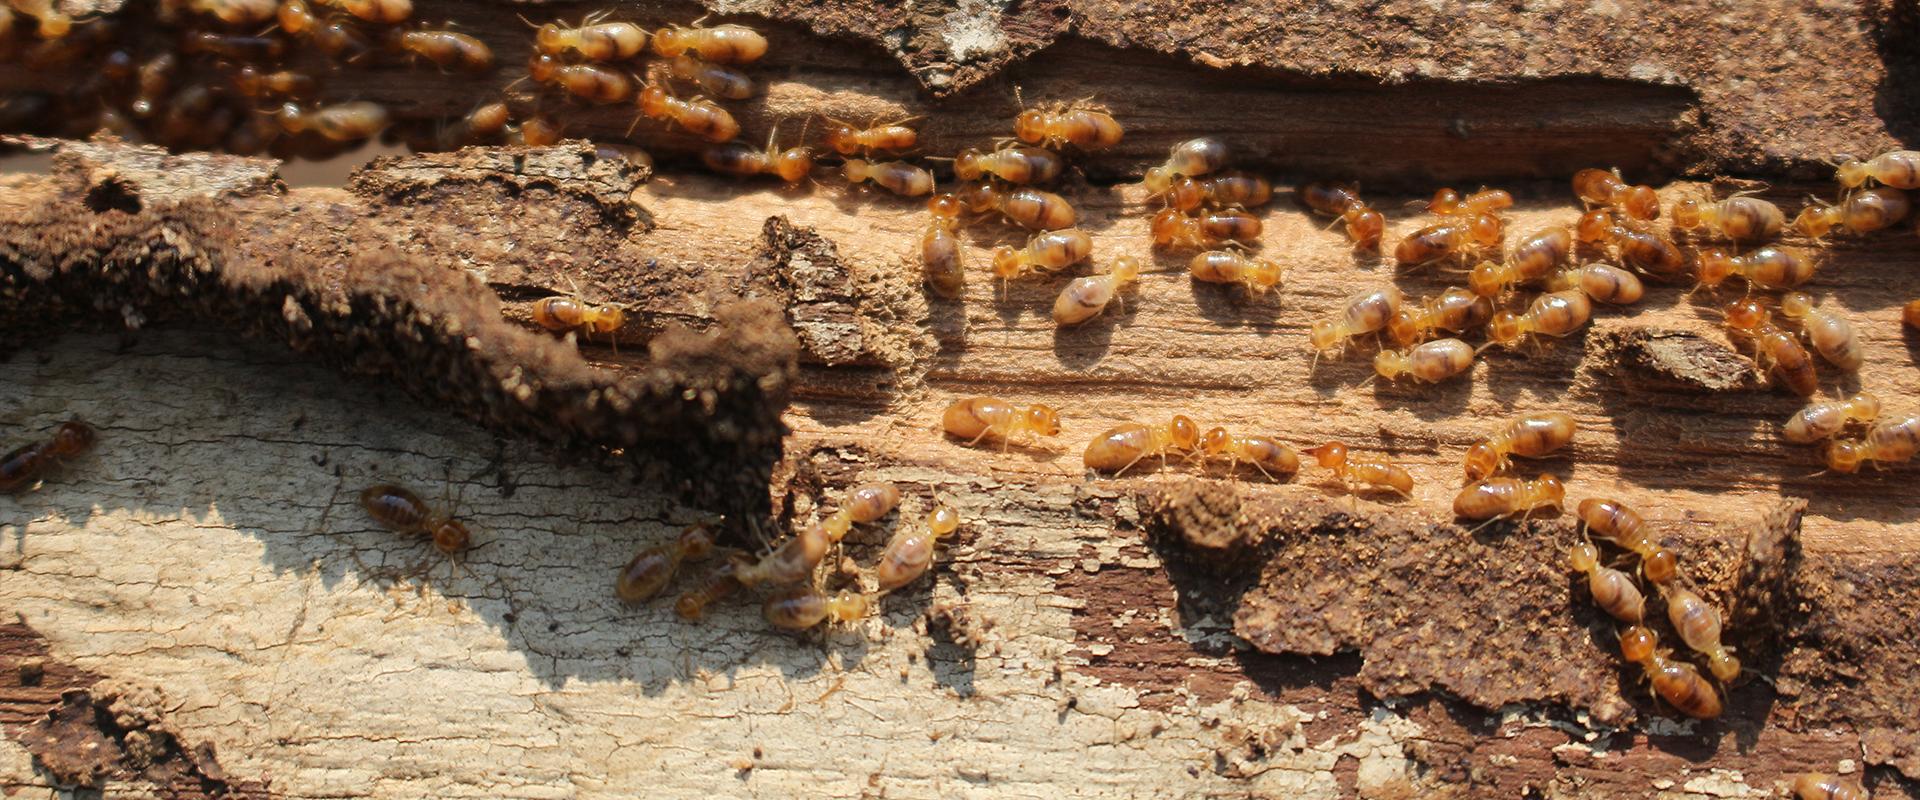 close up of termites on wood